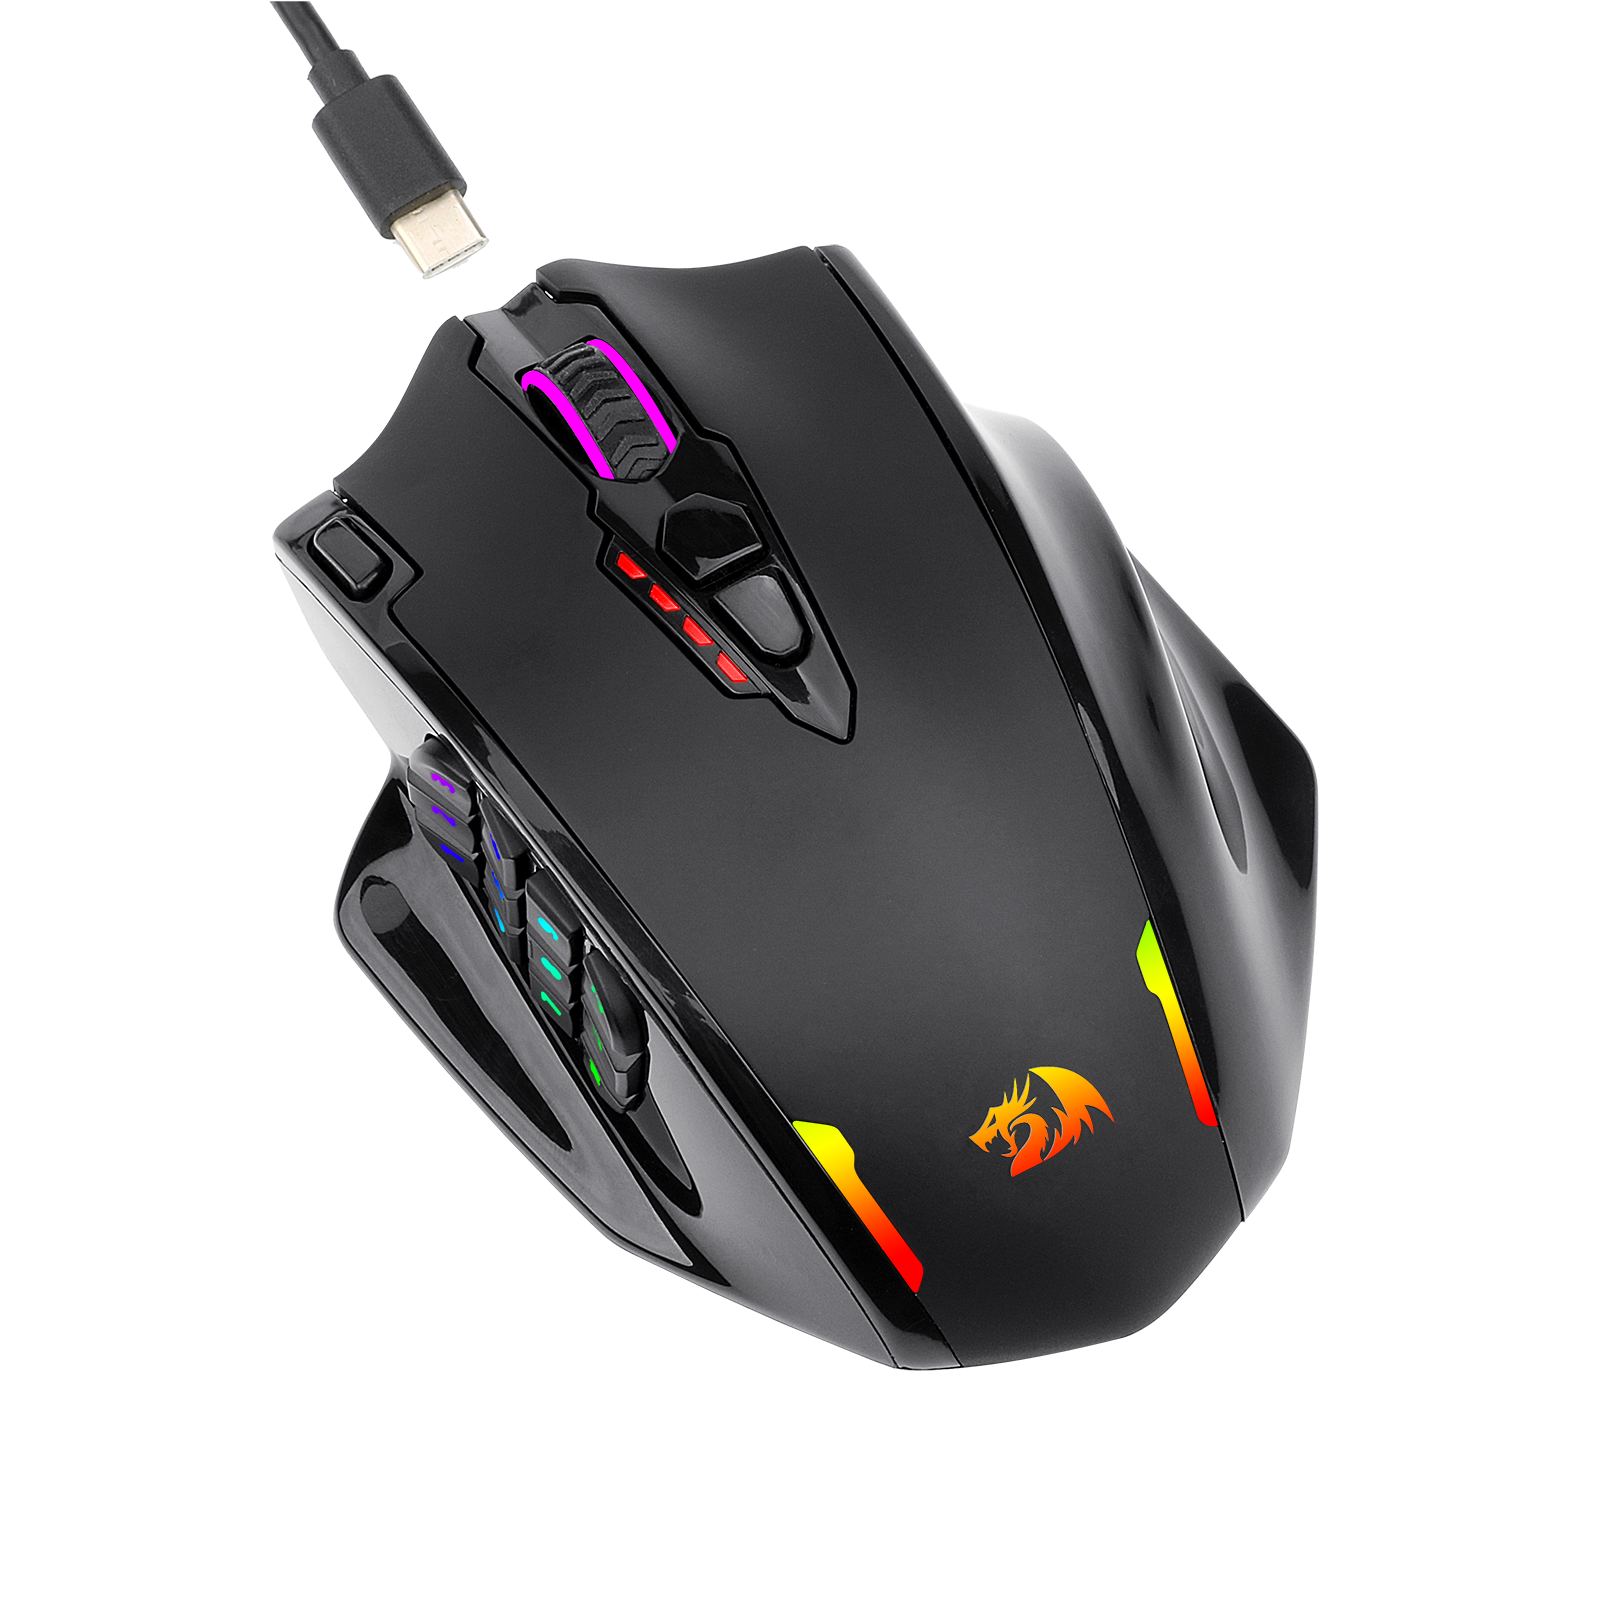  Redragon M913 Impact Elite Wireless Gaming Mouse, 16000 DPI  Wired/Wireless RGB Gamer Mouse with 16 Programmable Buttons, 45 Hr Battery  and Pro Optical Sensor, 12 Side Buttons MMO Mouse : Video Games